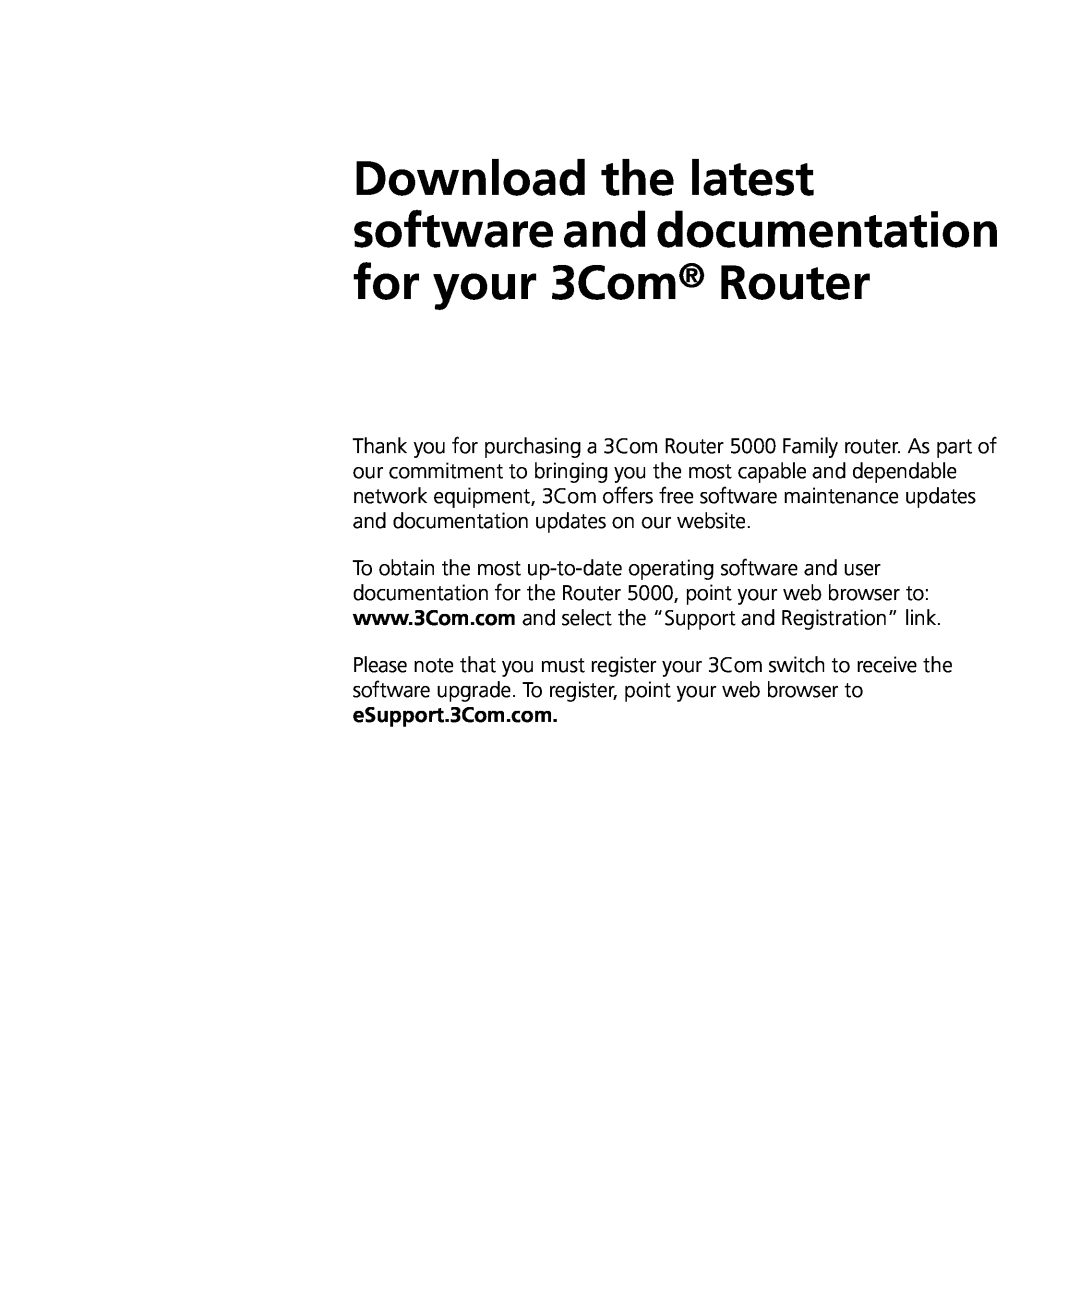 3Com 5000 manual Download the latest software and documentation for your 3Com Router 